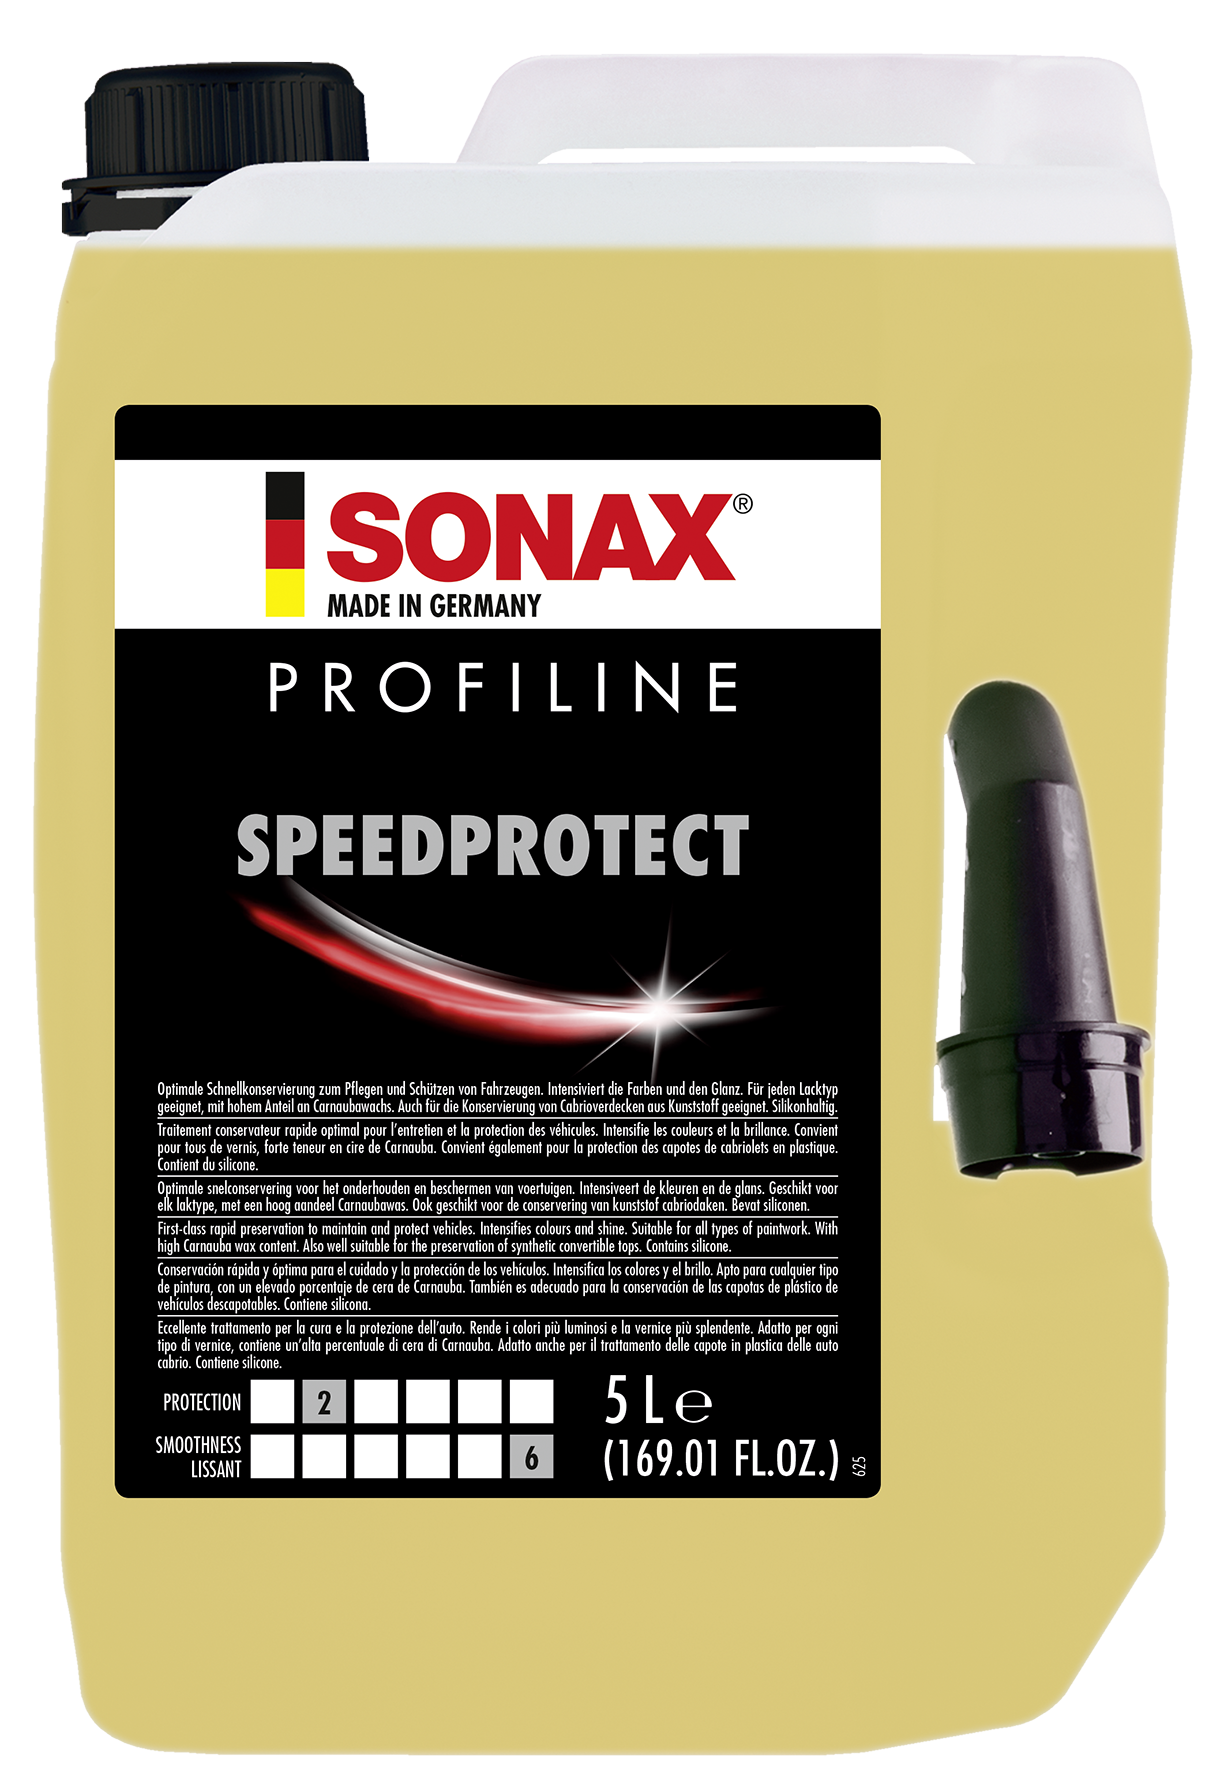 dung-dich-bao-ve-nhanh-be-mat-son-khi-uot---sonax-profiline-speedprotect